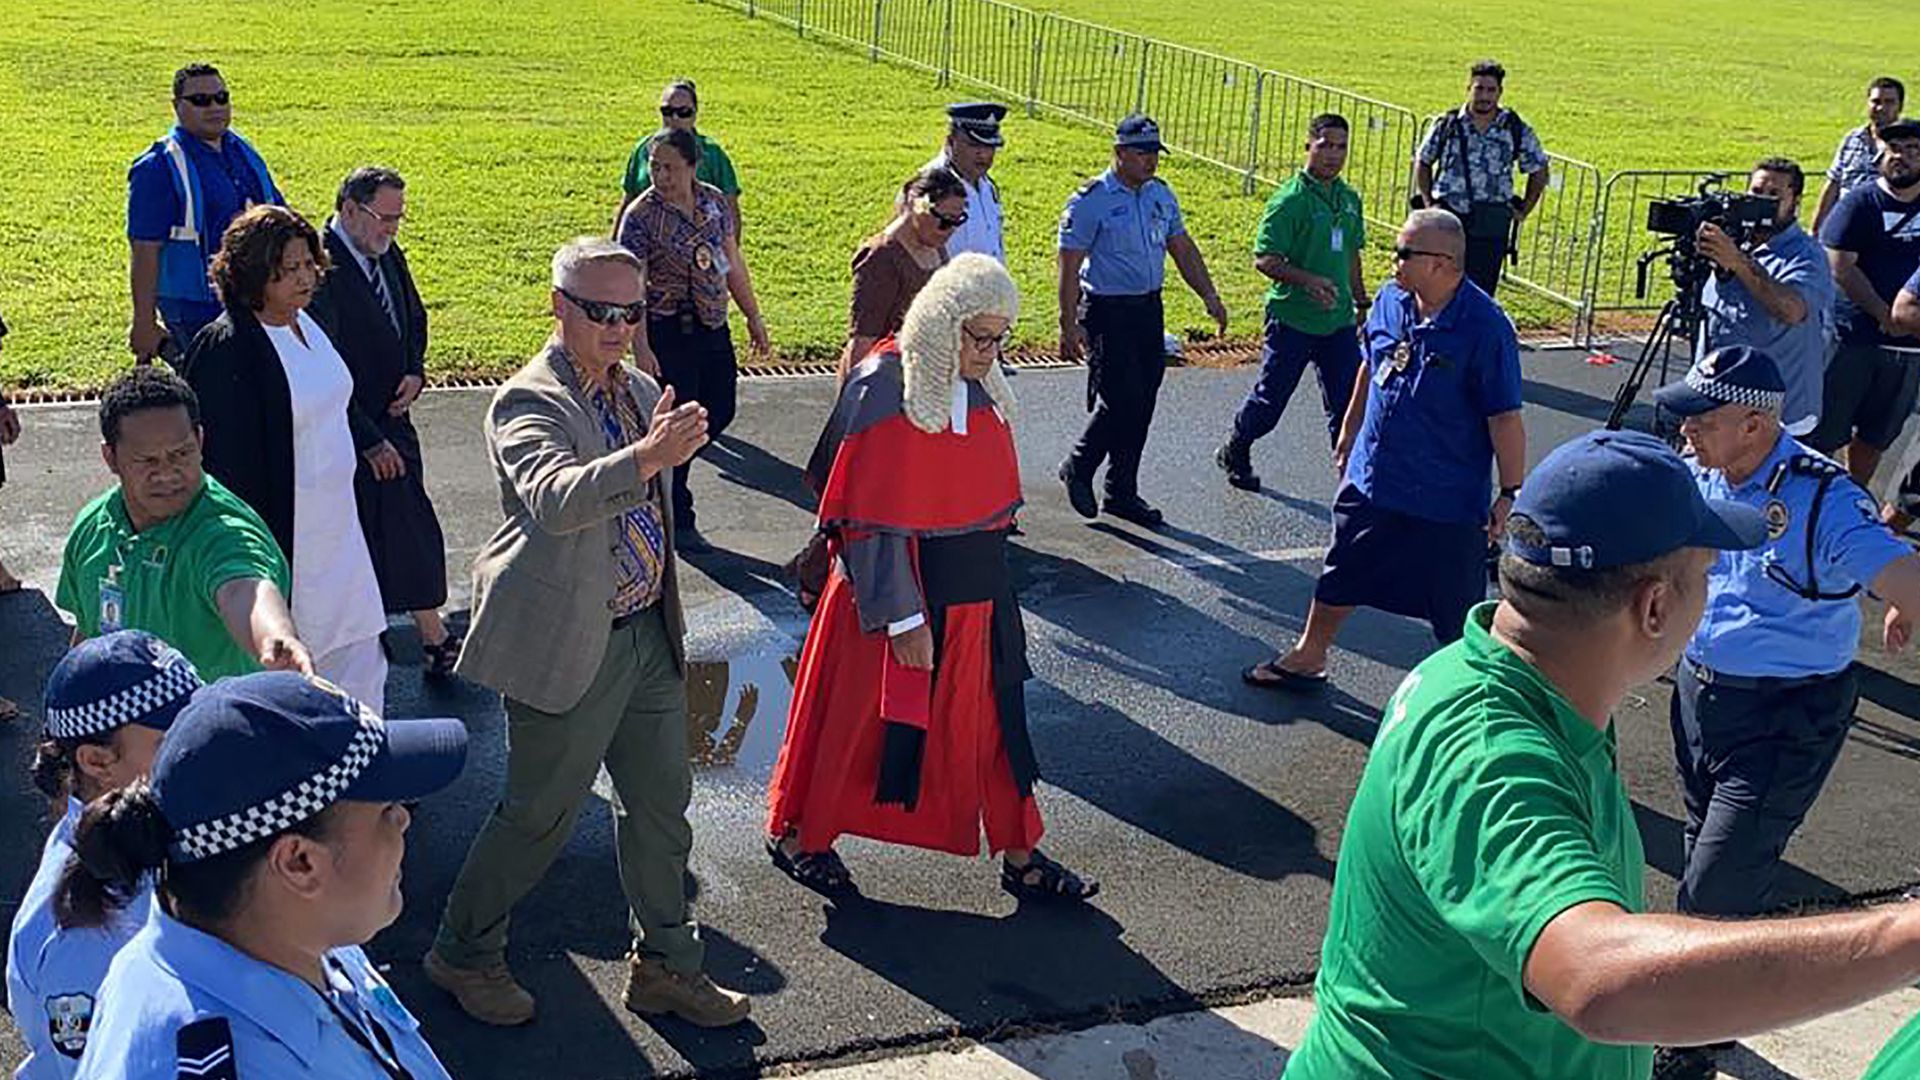 Chief Justice Satiu Simativa Perese arrives at parliament in Apia on May 24, 2021, as he and Samoa's prime minister-elect Fiame Naomi Mata'afa were locked out of the Pacific nation's parliament